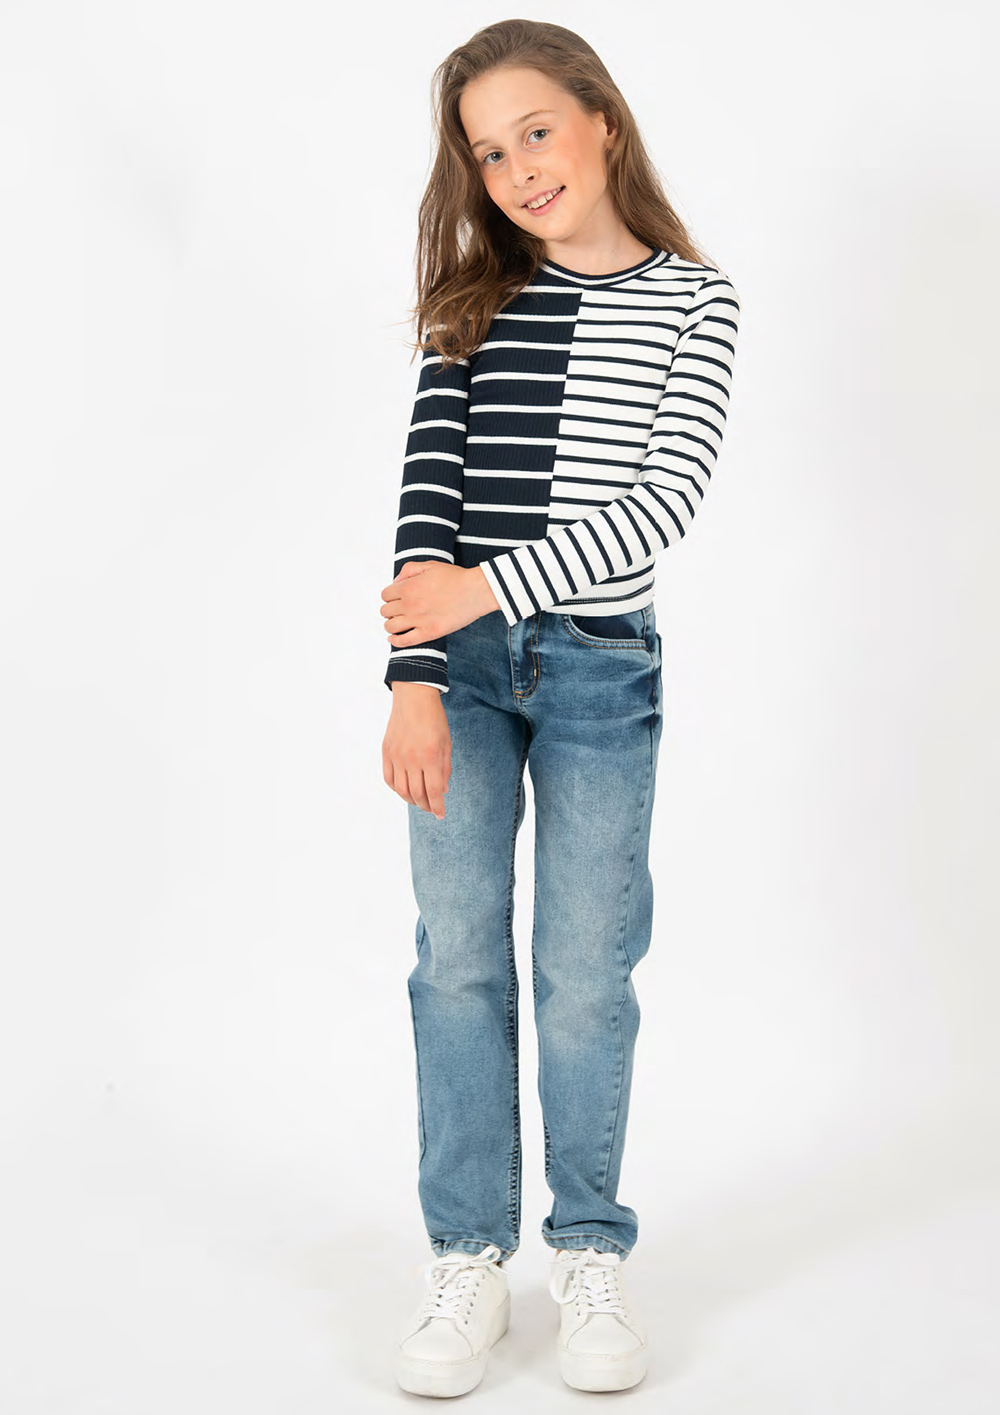 1382-Girls Straight Jeans avaible in Slim, Normal